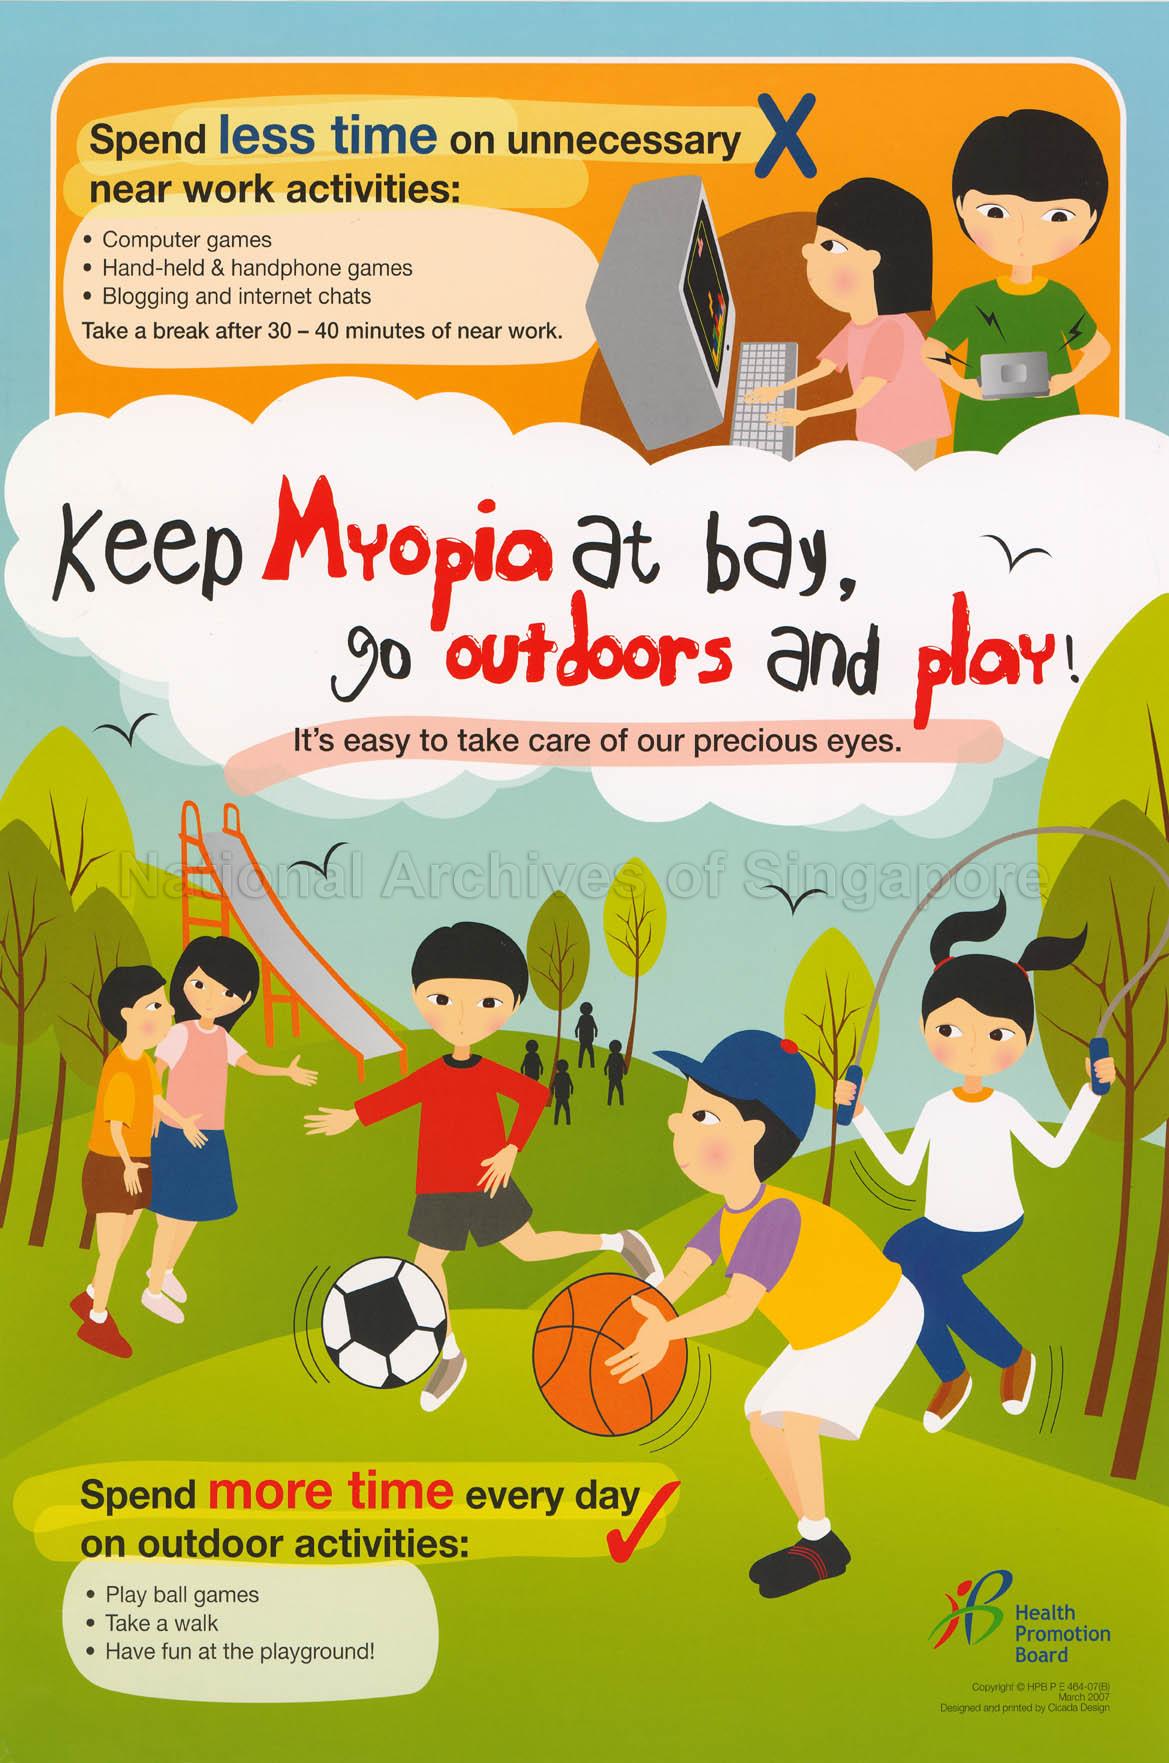 Keep Myopia at bay, go outdoors and play! It's easy to take care of our precious eyes.